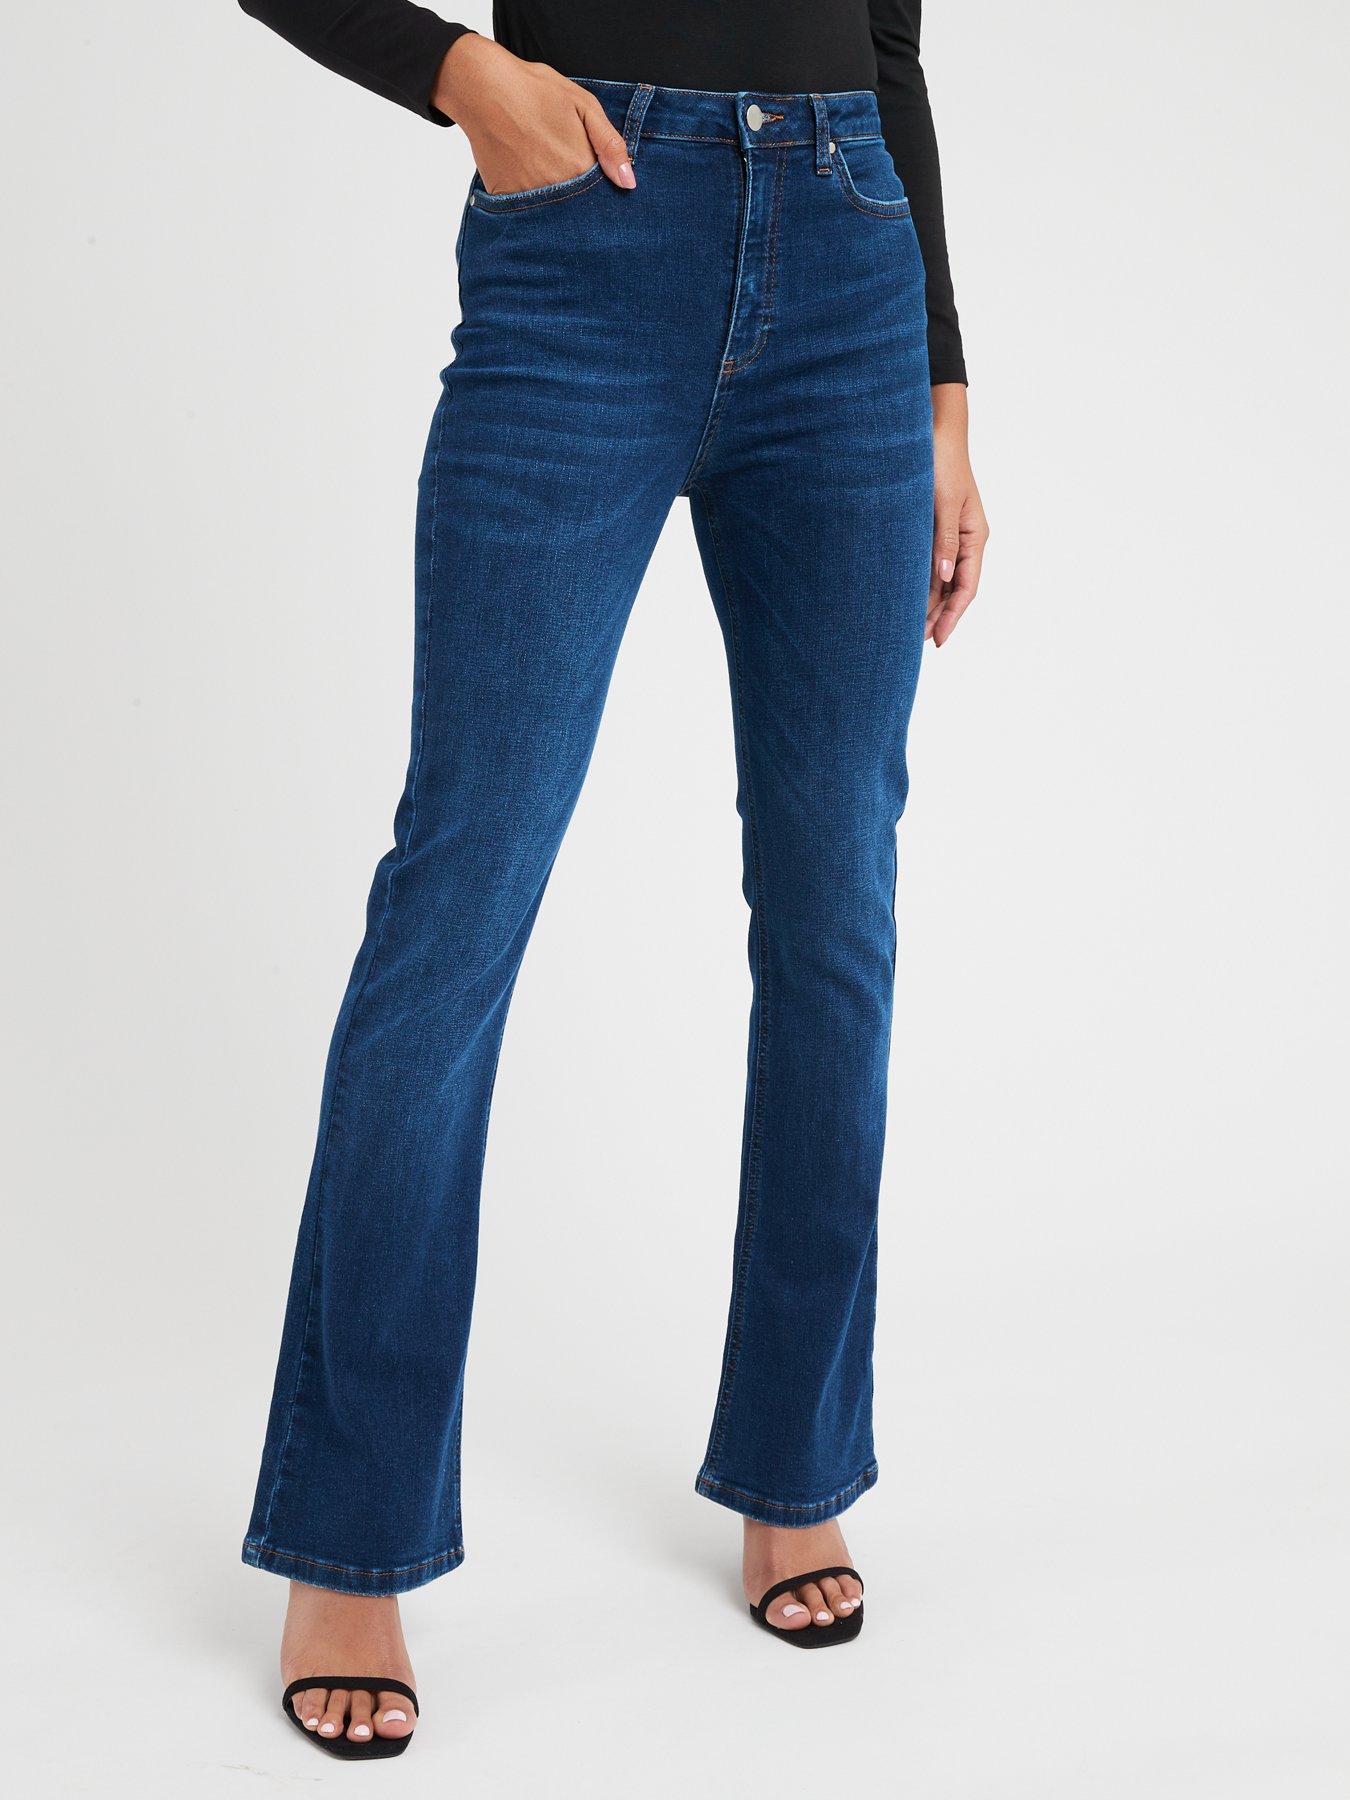 Flared Jeans For Women | Shop Flared Jeans | Very.co.uk